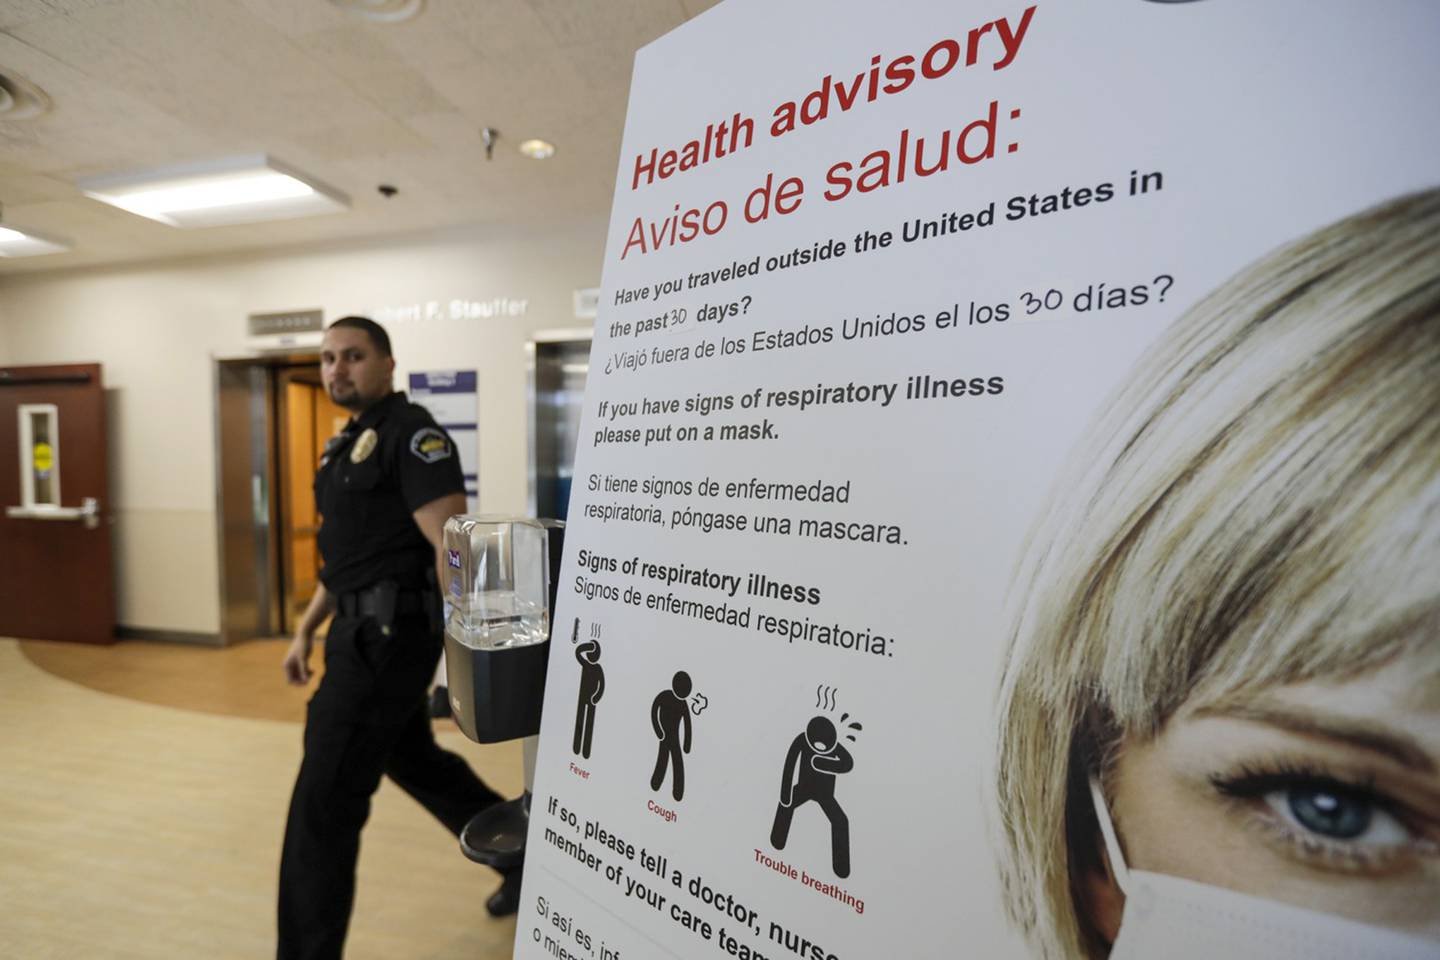 Students at UC Davis and other colleges under self-quarantine after potential coronavirus exposure